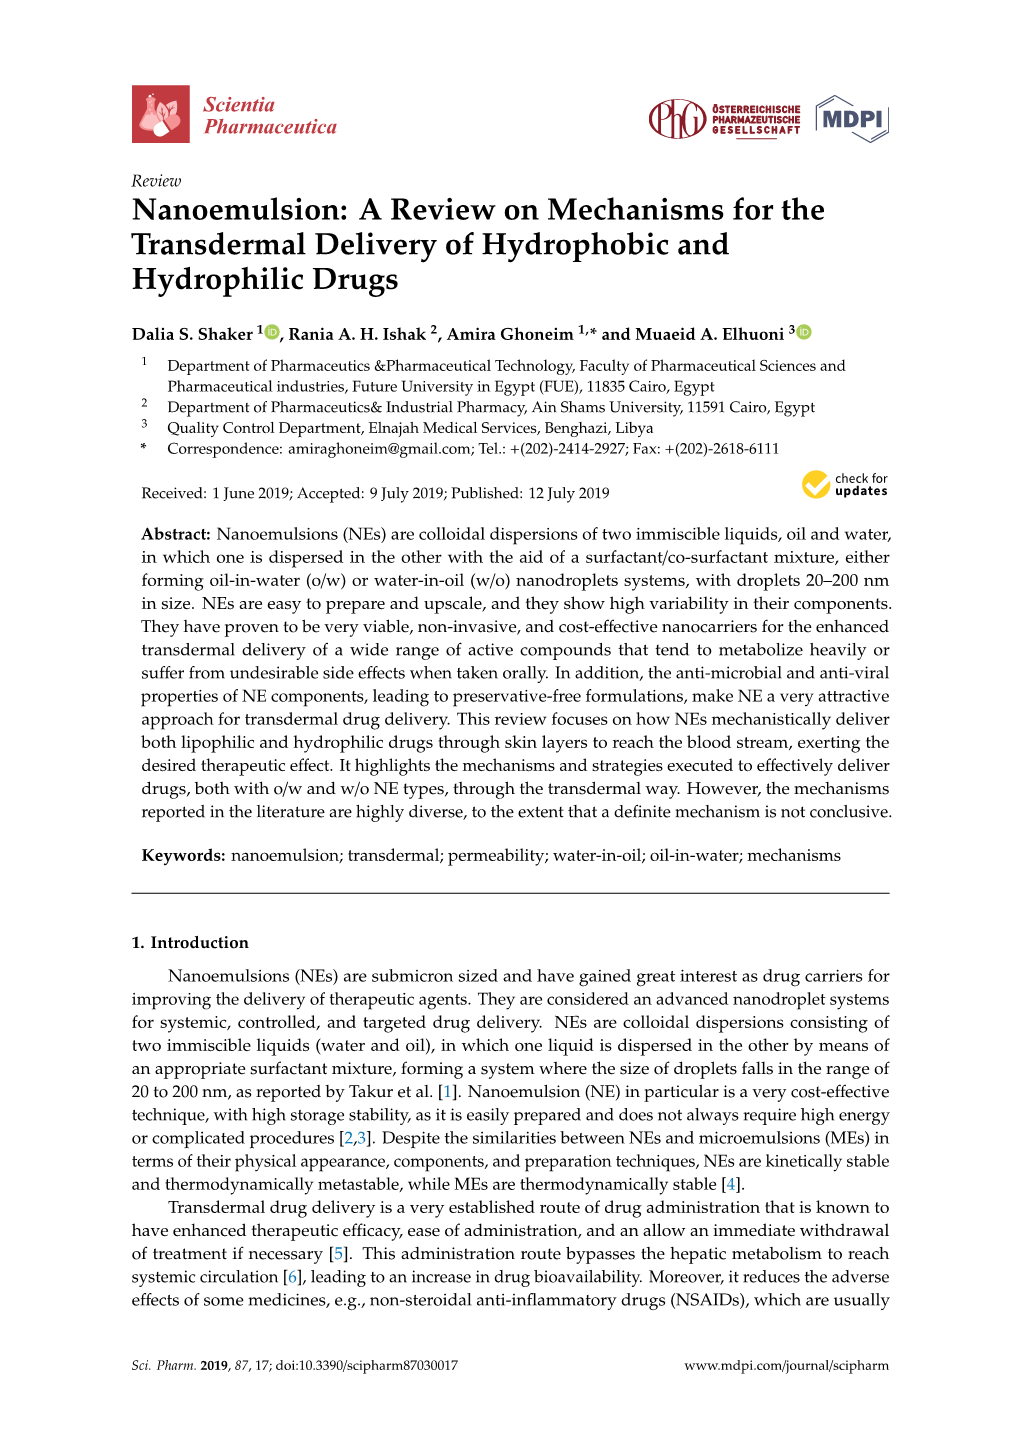 Nanoemulsion: a Review on Mechanisms for the Transdermal Delivery of Hydrophobic and Hydrophilic Drugs